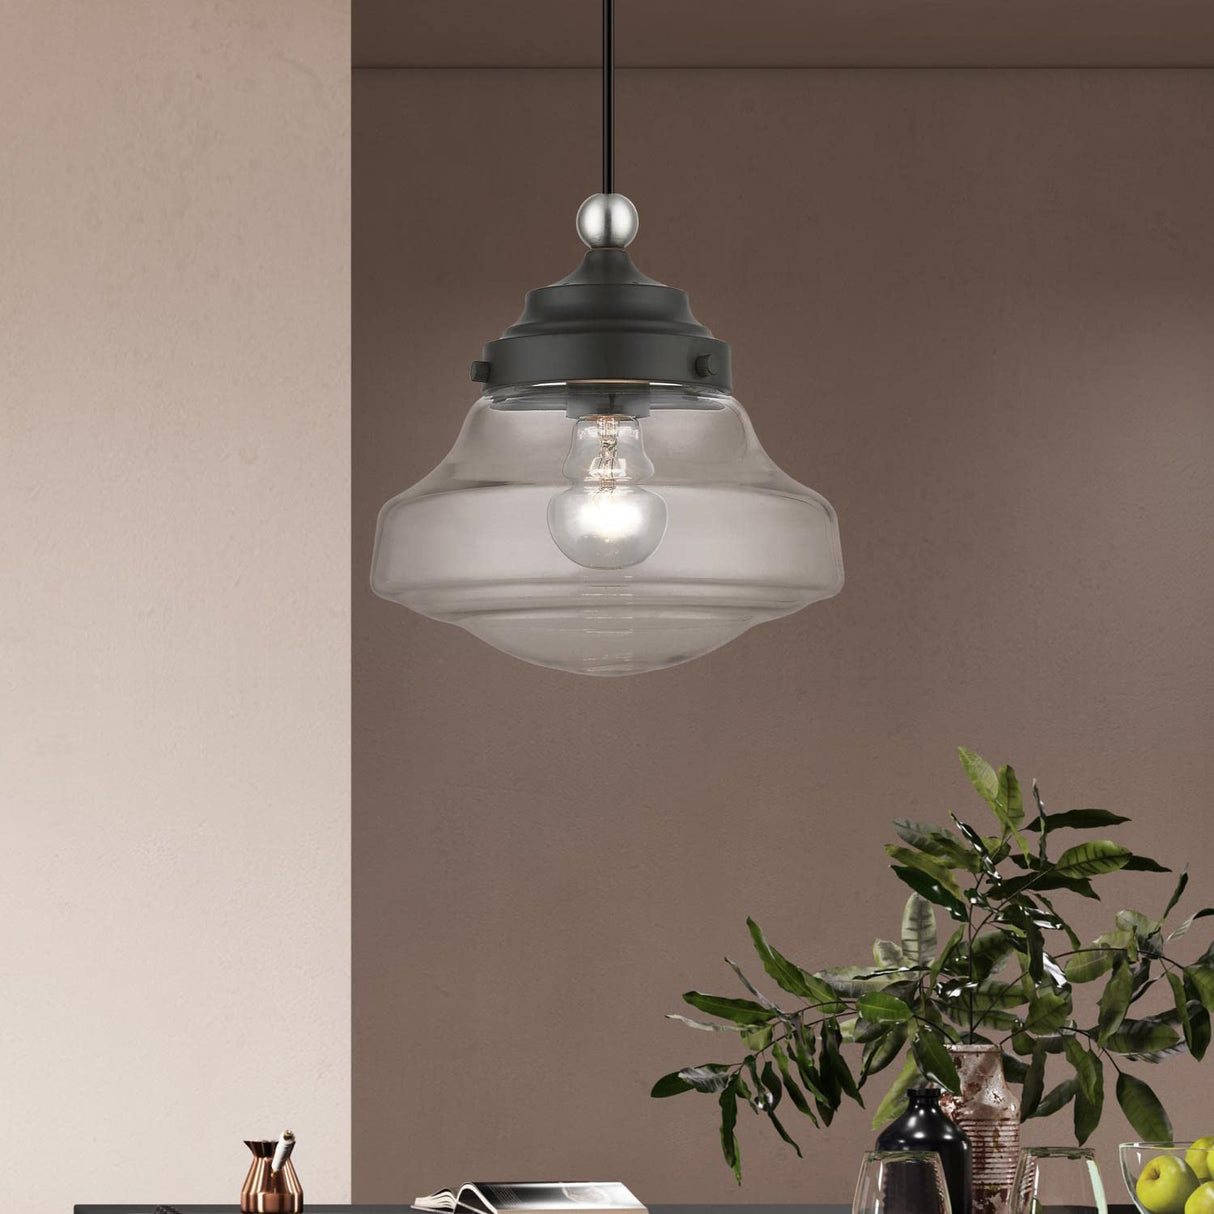 Avondale 1 Light Mini Pendant in Black with Brushed Nickel Accent (41293-04)